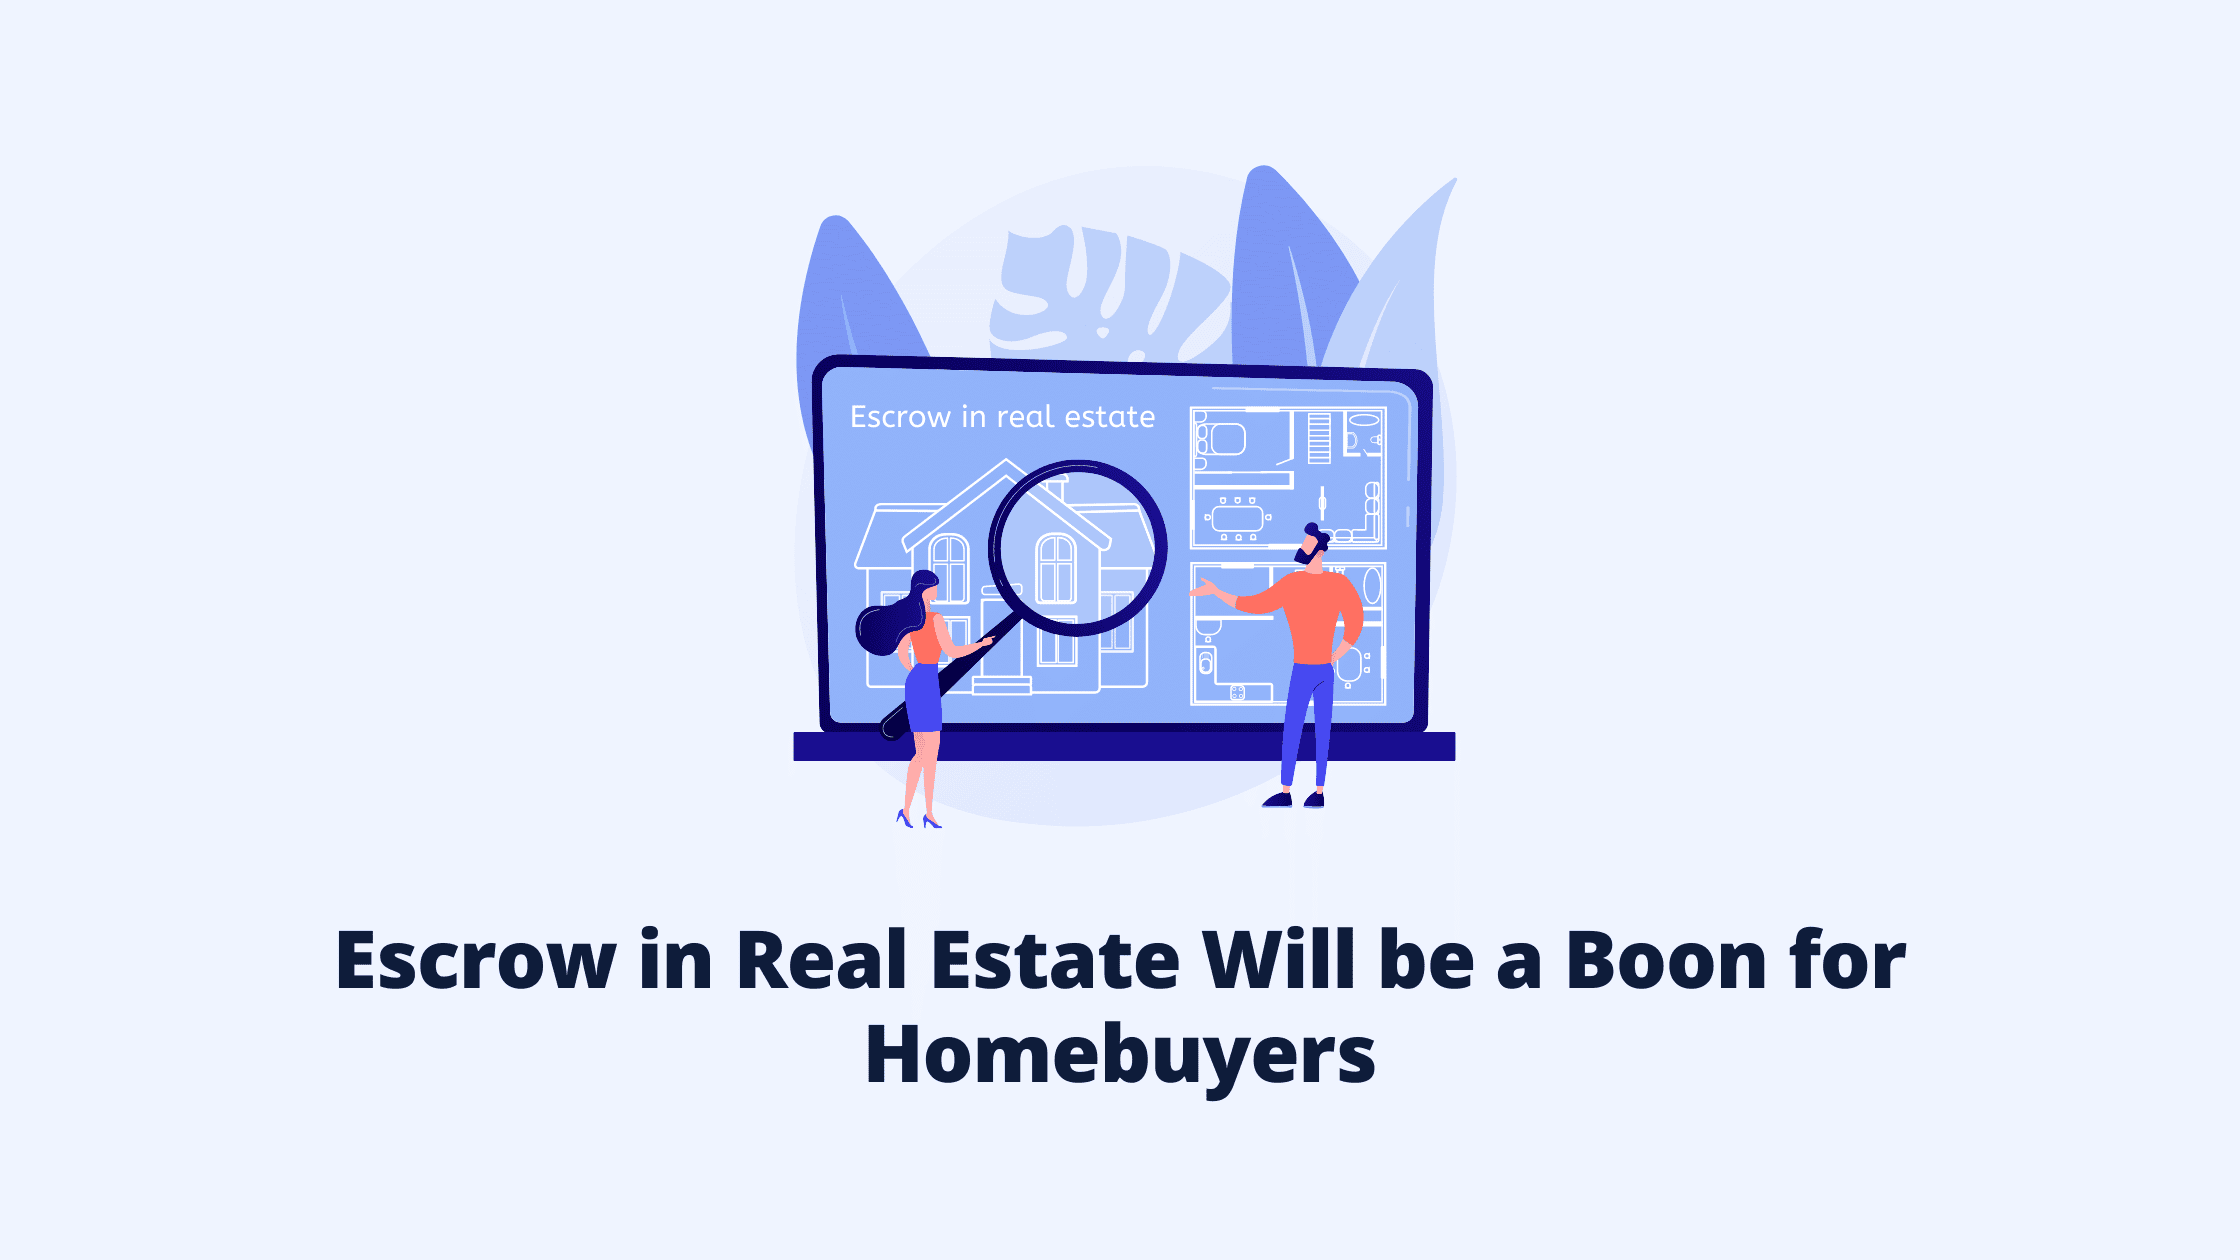 Escrow in Real Estate Will be a Boon for Homebuyers